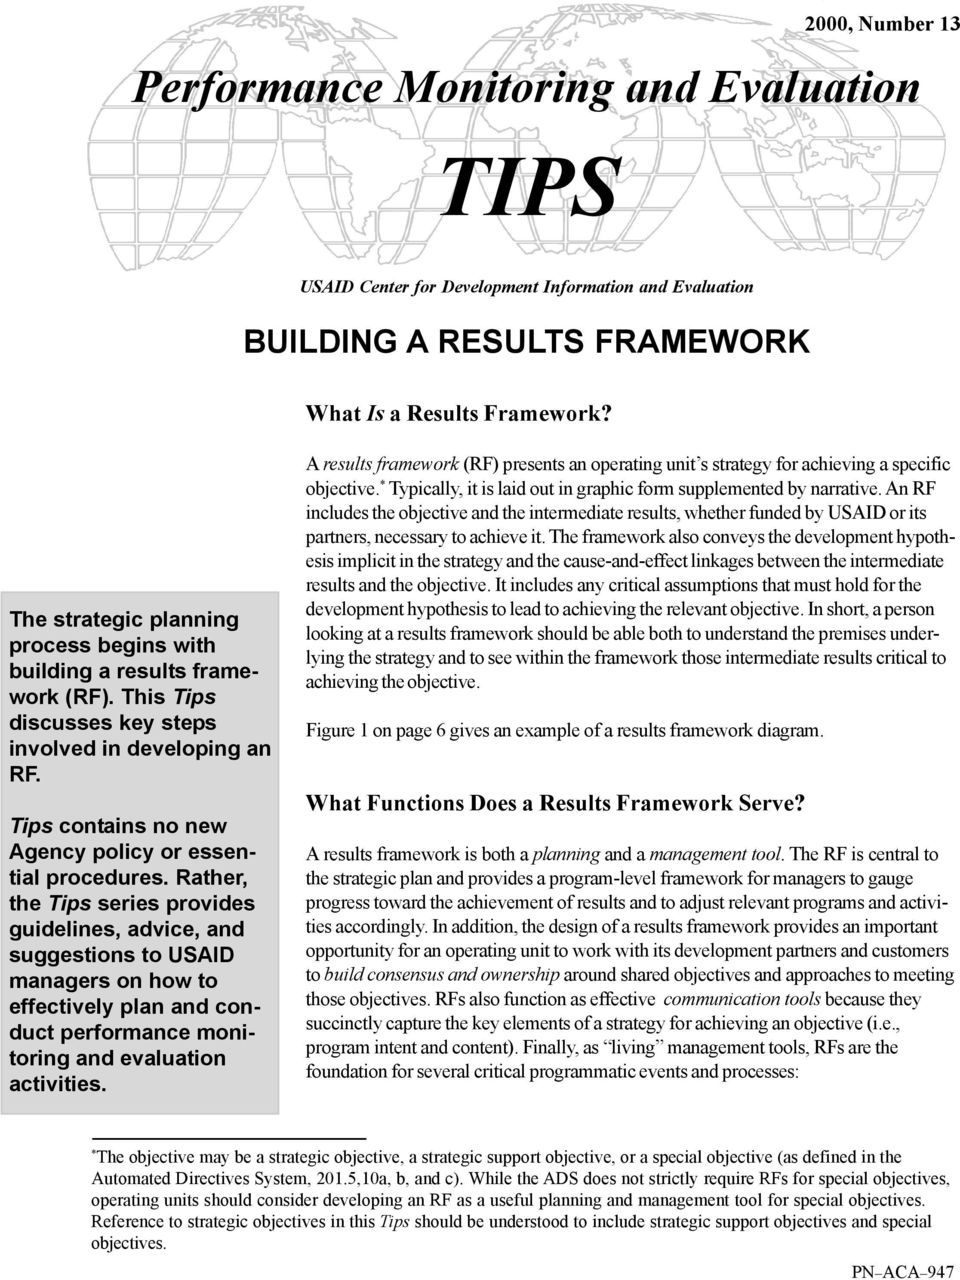 Rather, the Tips series provides guidelines, advice, and suggestions to USAID managers on how to effectively plan and conduct performance monitoring and evaluation activities.